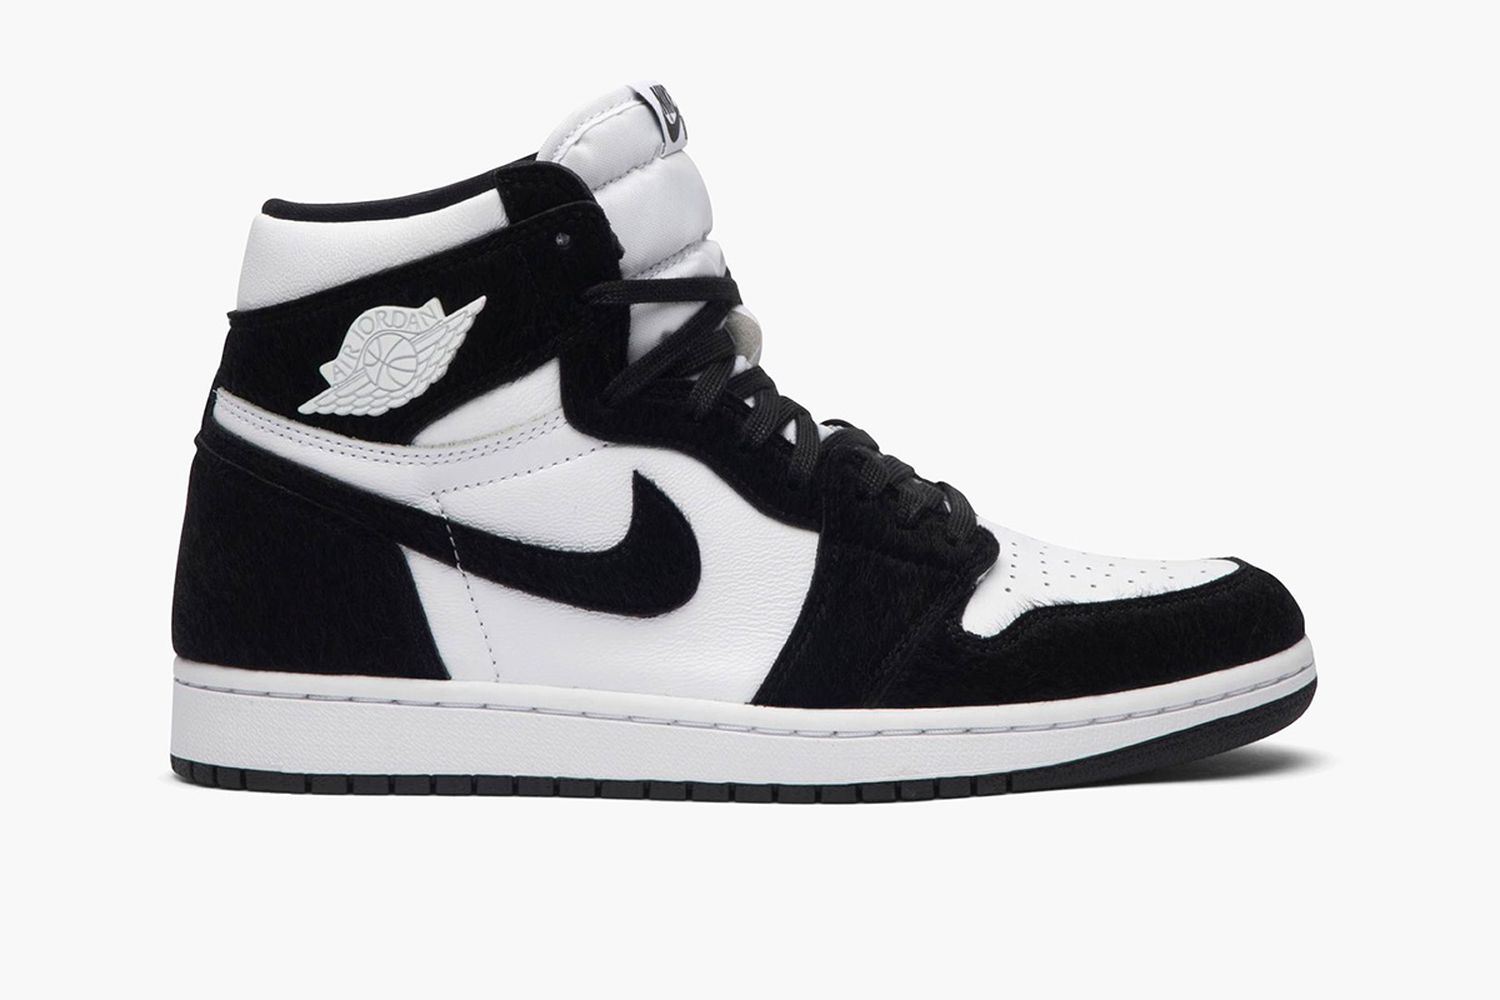 10 of the Best Jordan 1 High Colorways for 2022